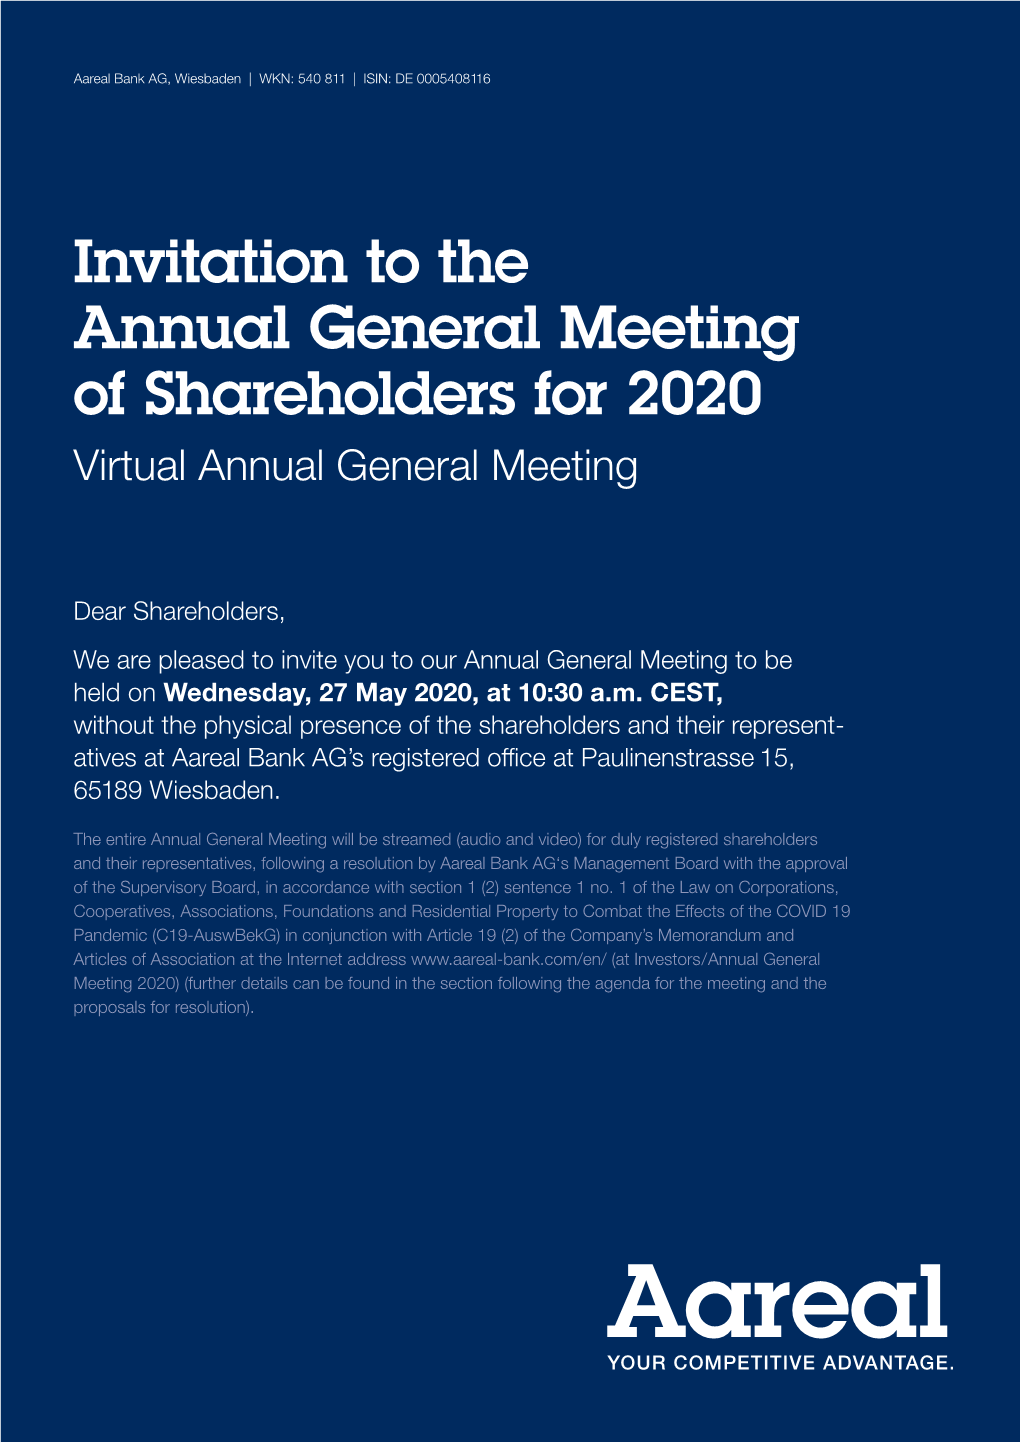 Invitation to the Annual General Meeting 2020